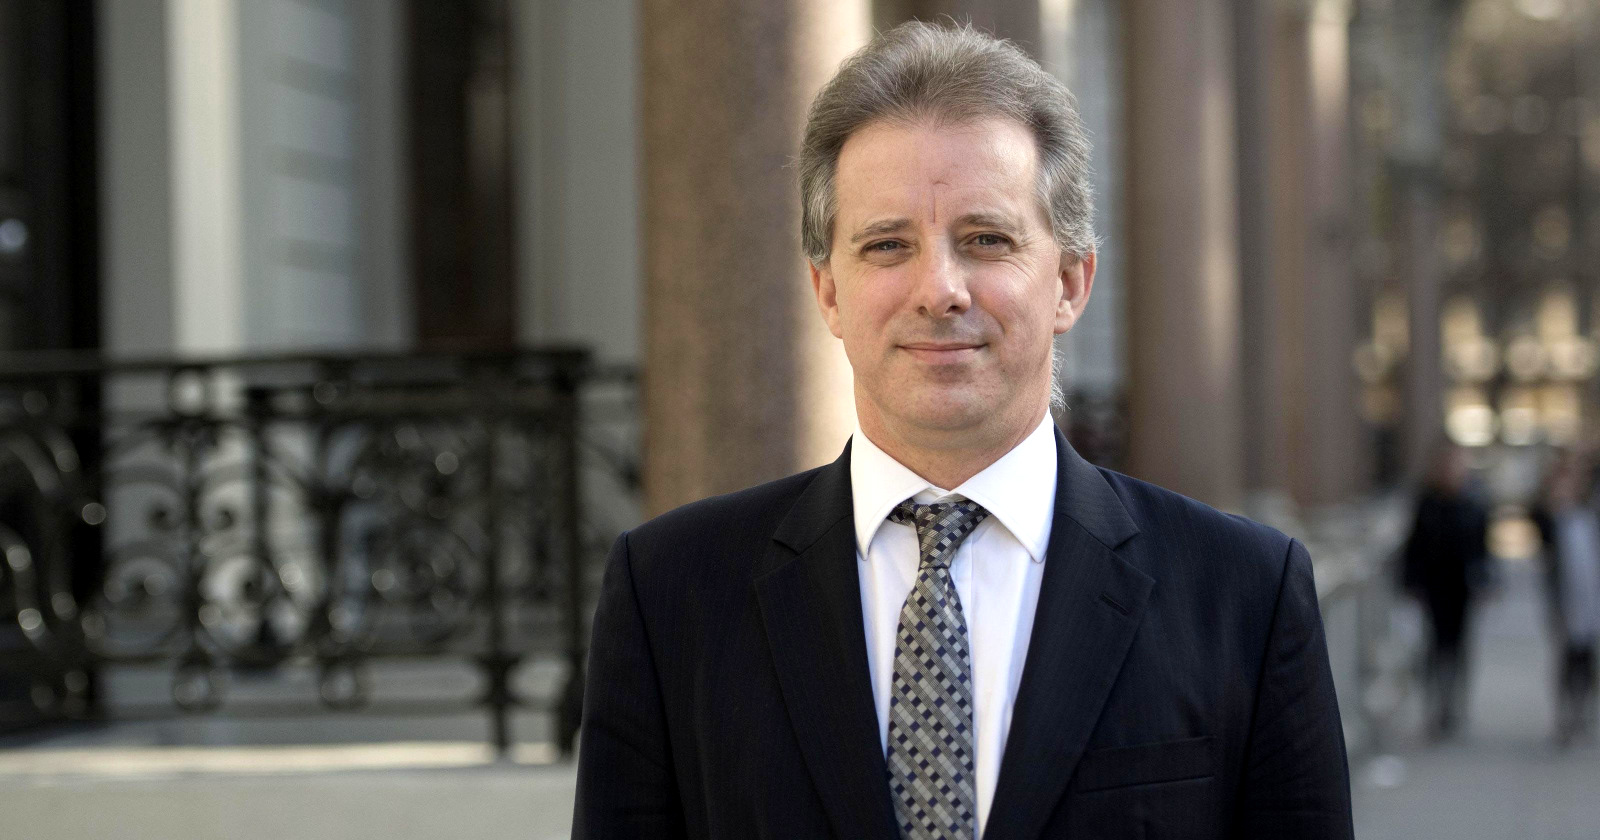 Christopher Steele, the former British spy who wrote the'Steele dossier' about alleged ties between Donald Trump and Russia. Victoria Jones | PA